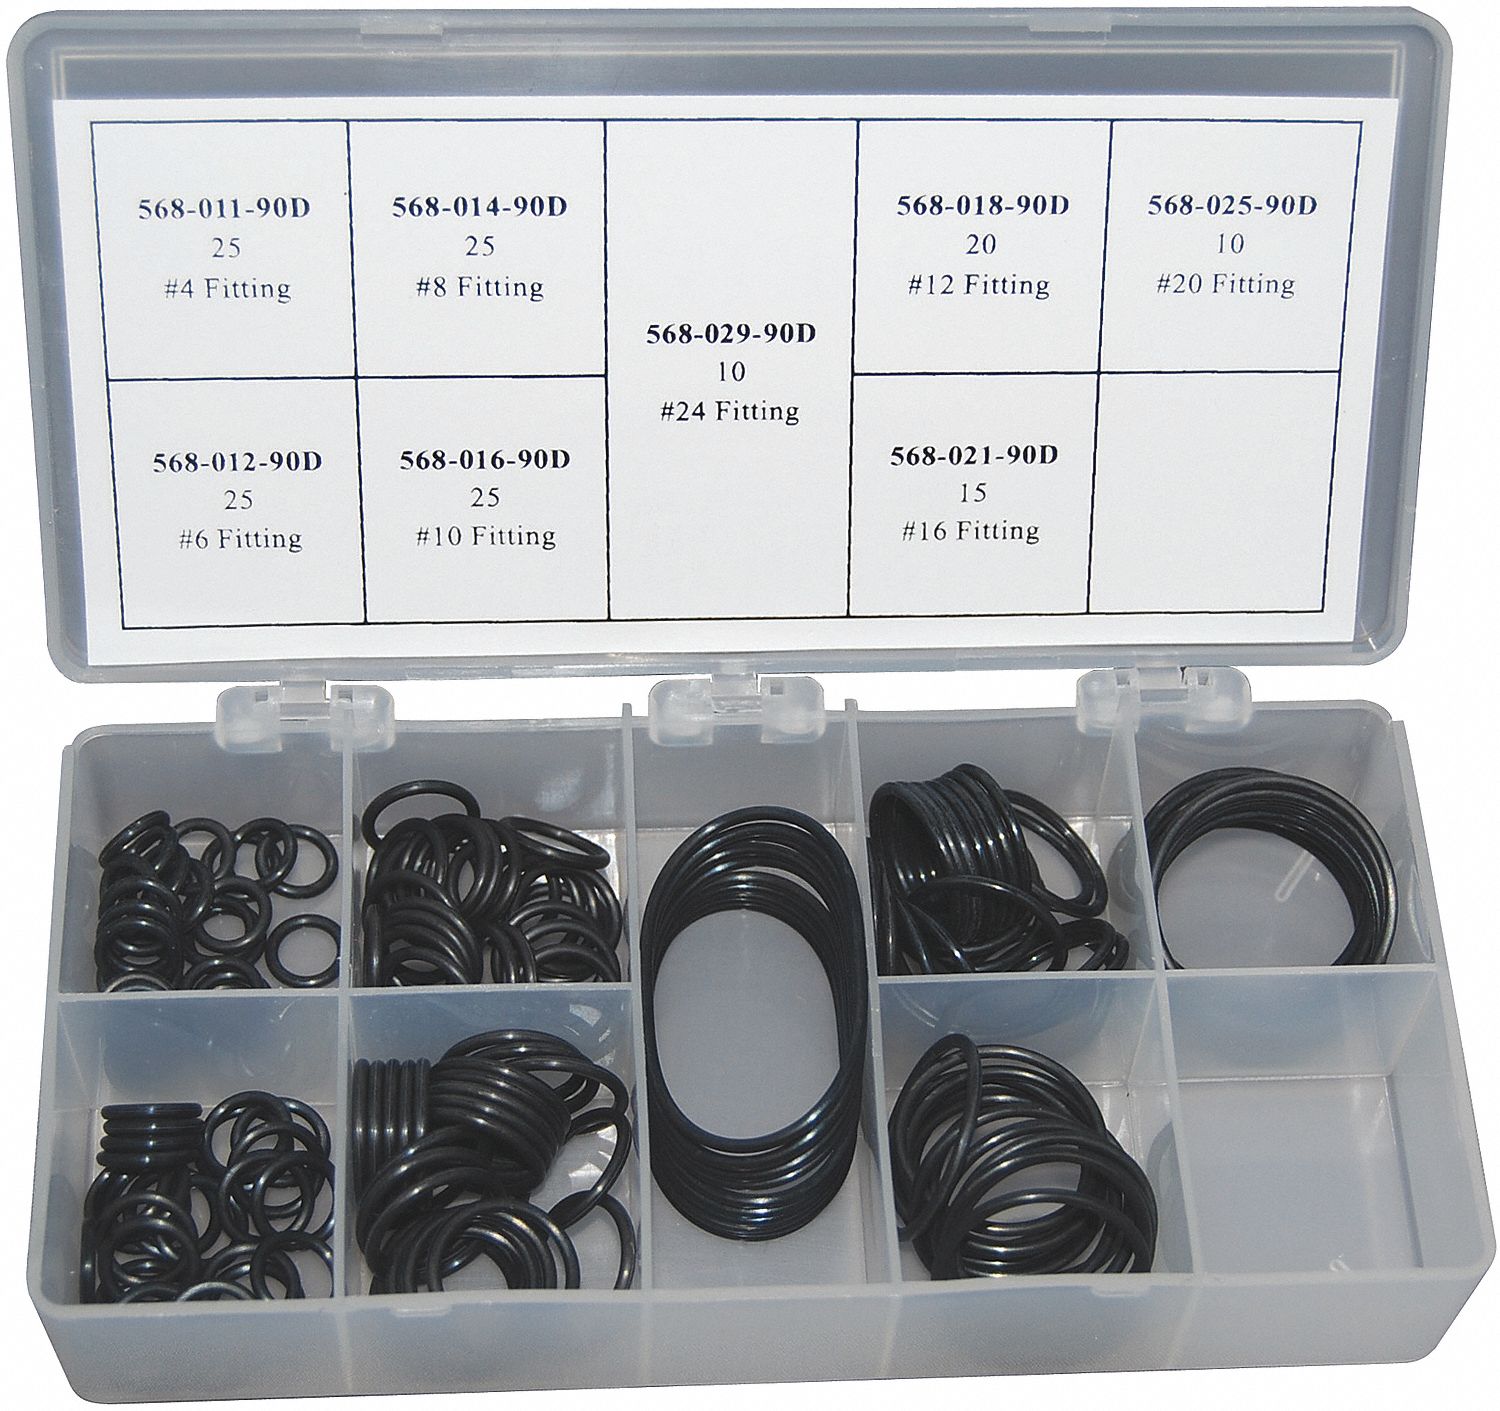 O-RING FACE KIT, 90 DUROMETER, 8 DIFFERENT SIZES, BUNA N RUBBER, PC 155